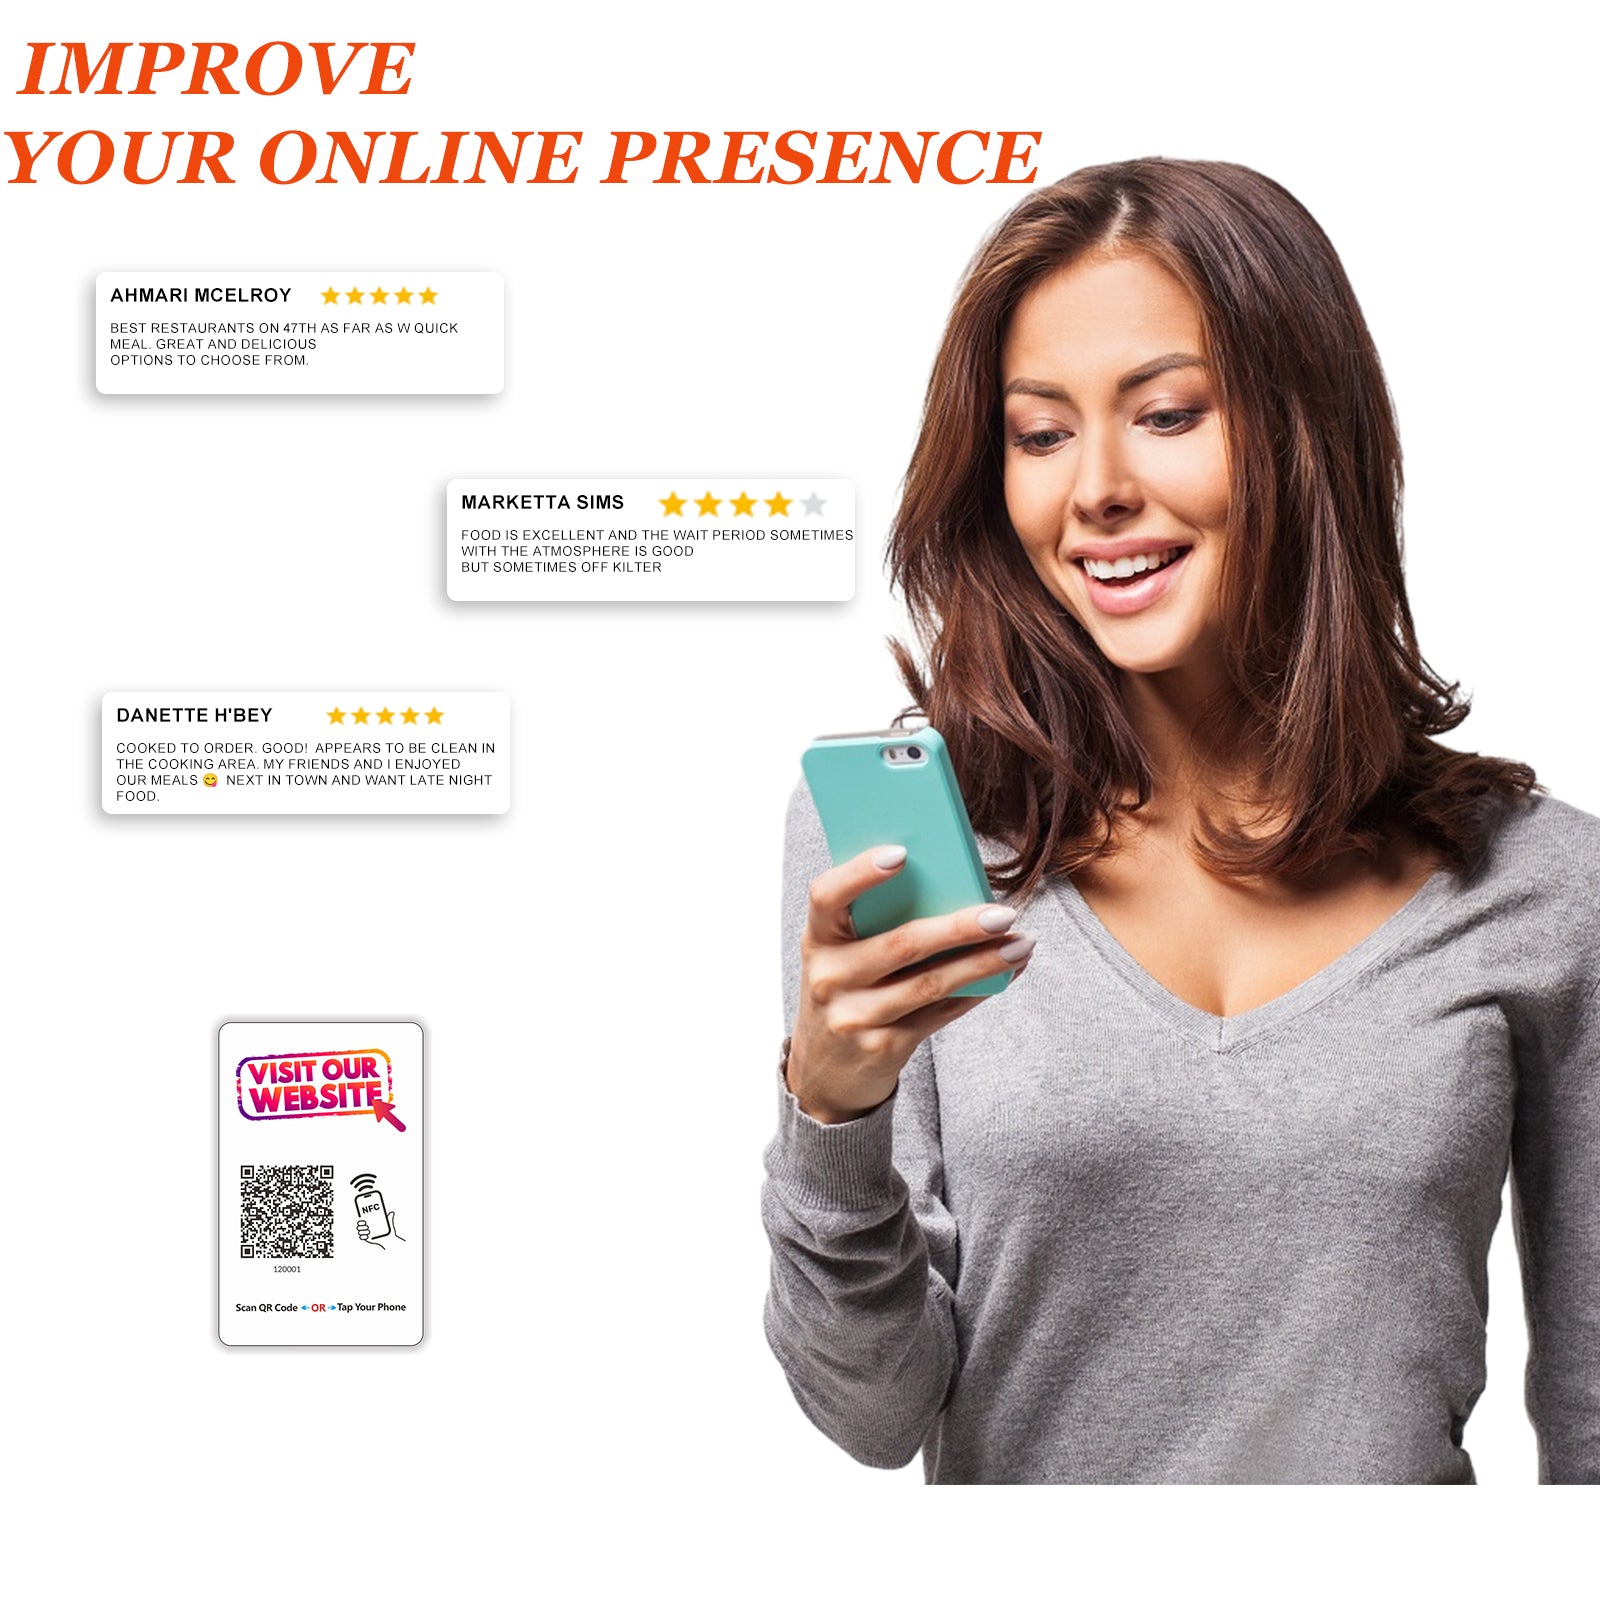 Visit Our Website Touchless Connect Card Reusable QR Code NFC Tap Card